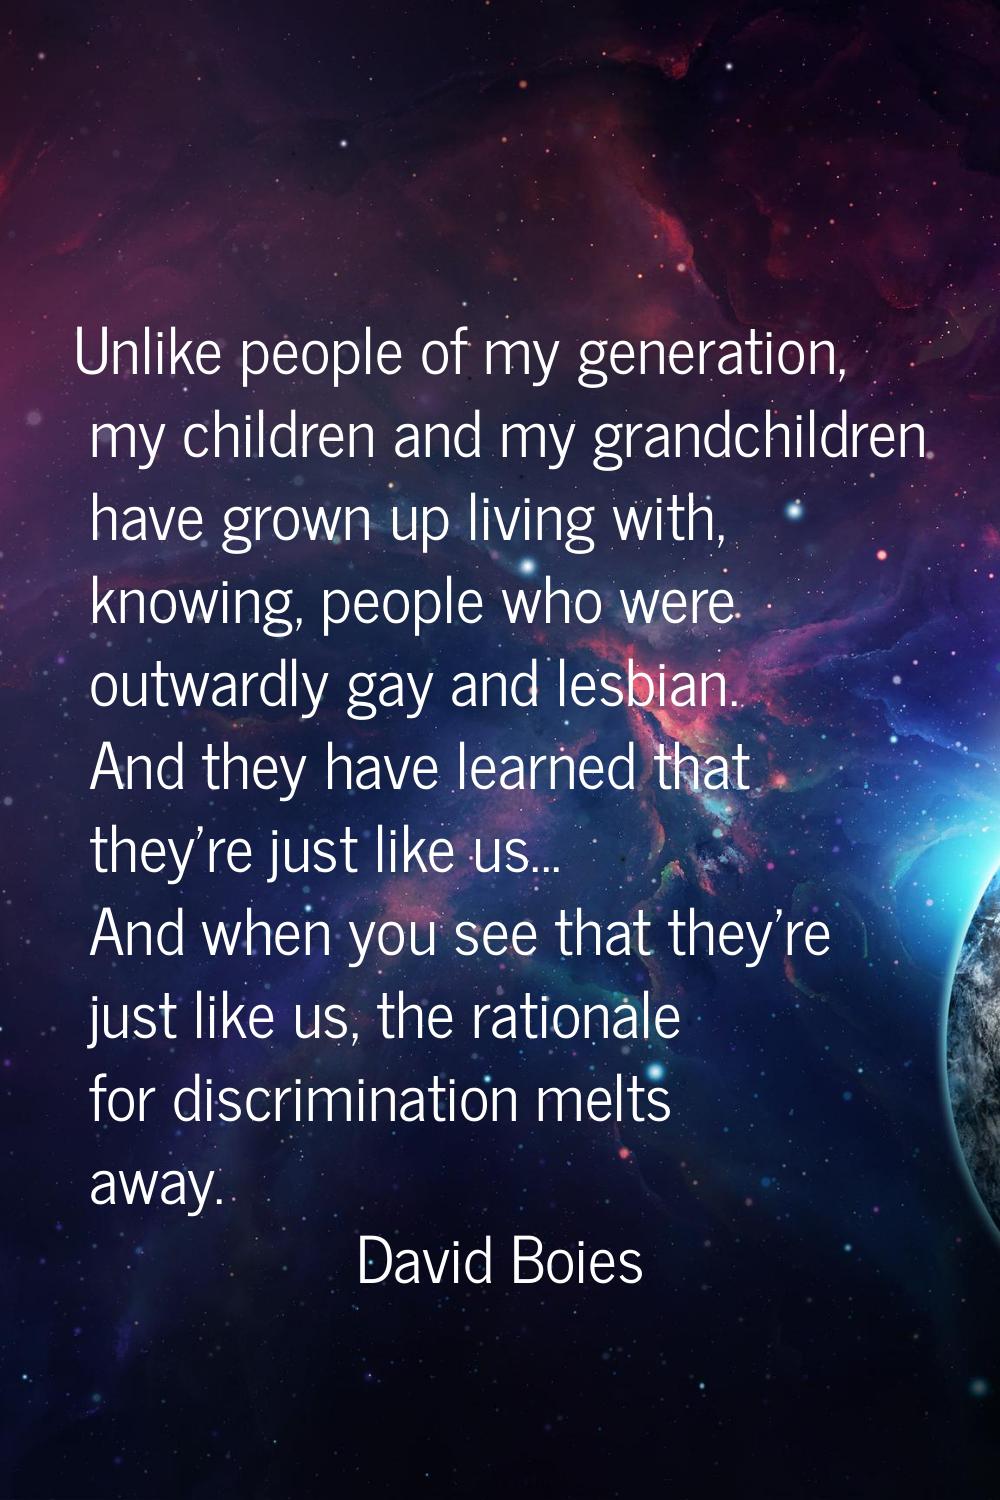 Unlike people of my generation, my children and my grandchildren have grown up living with, knowing